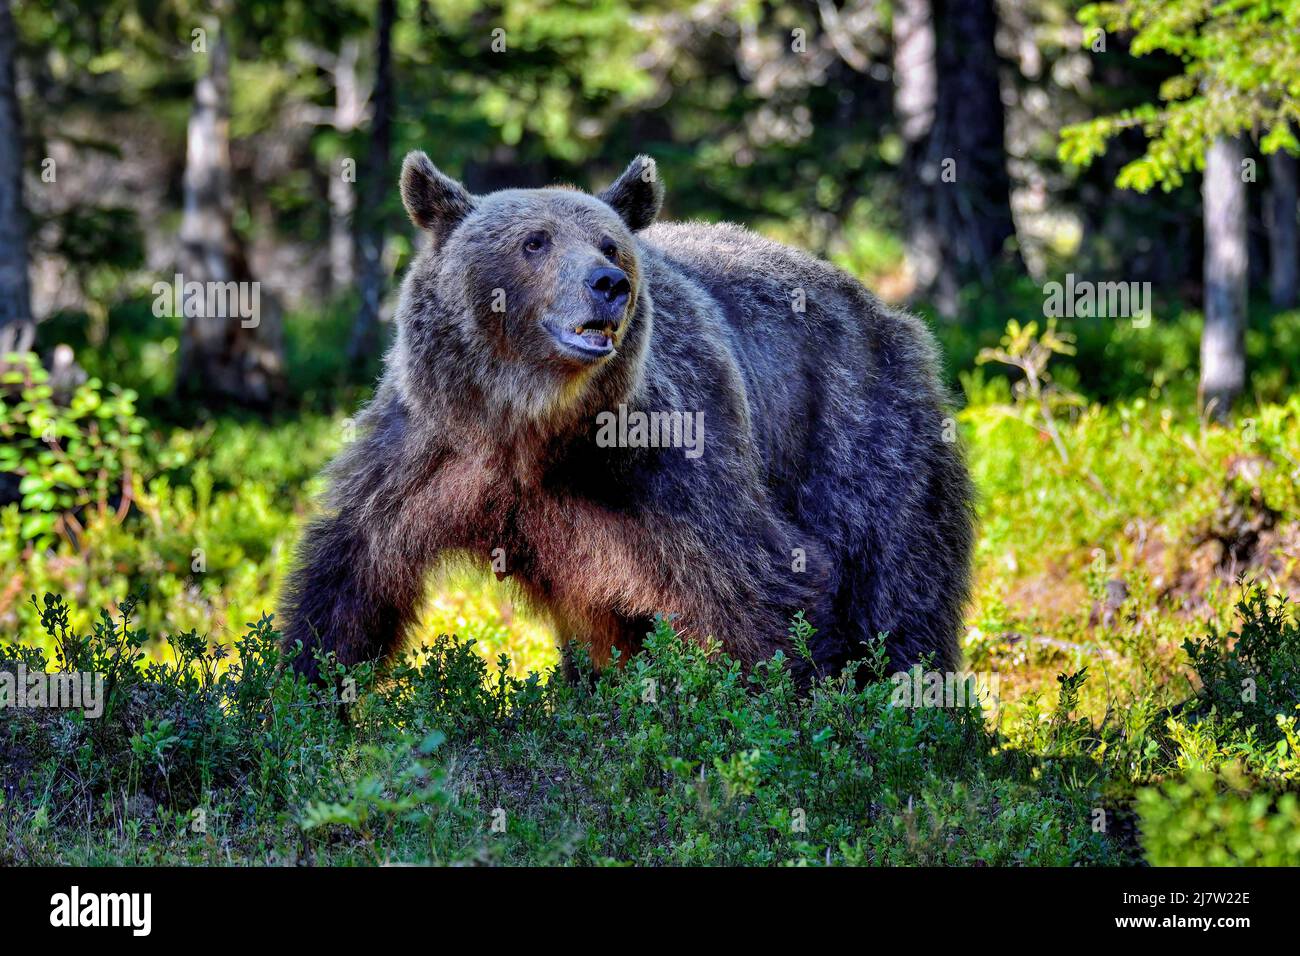 Brown bear in the forest. Stock Photo